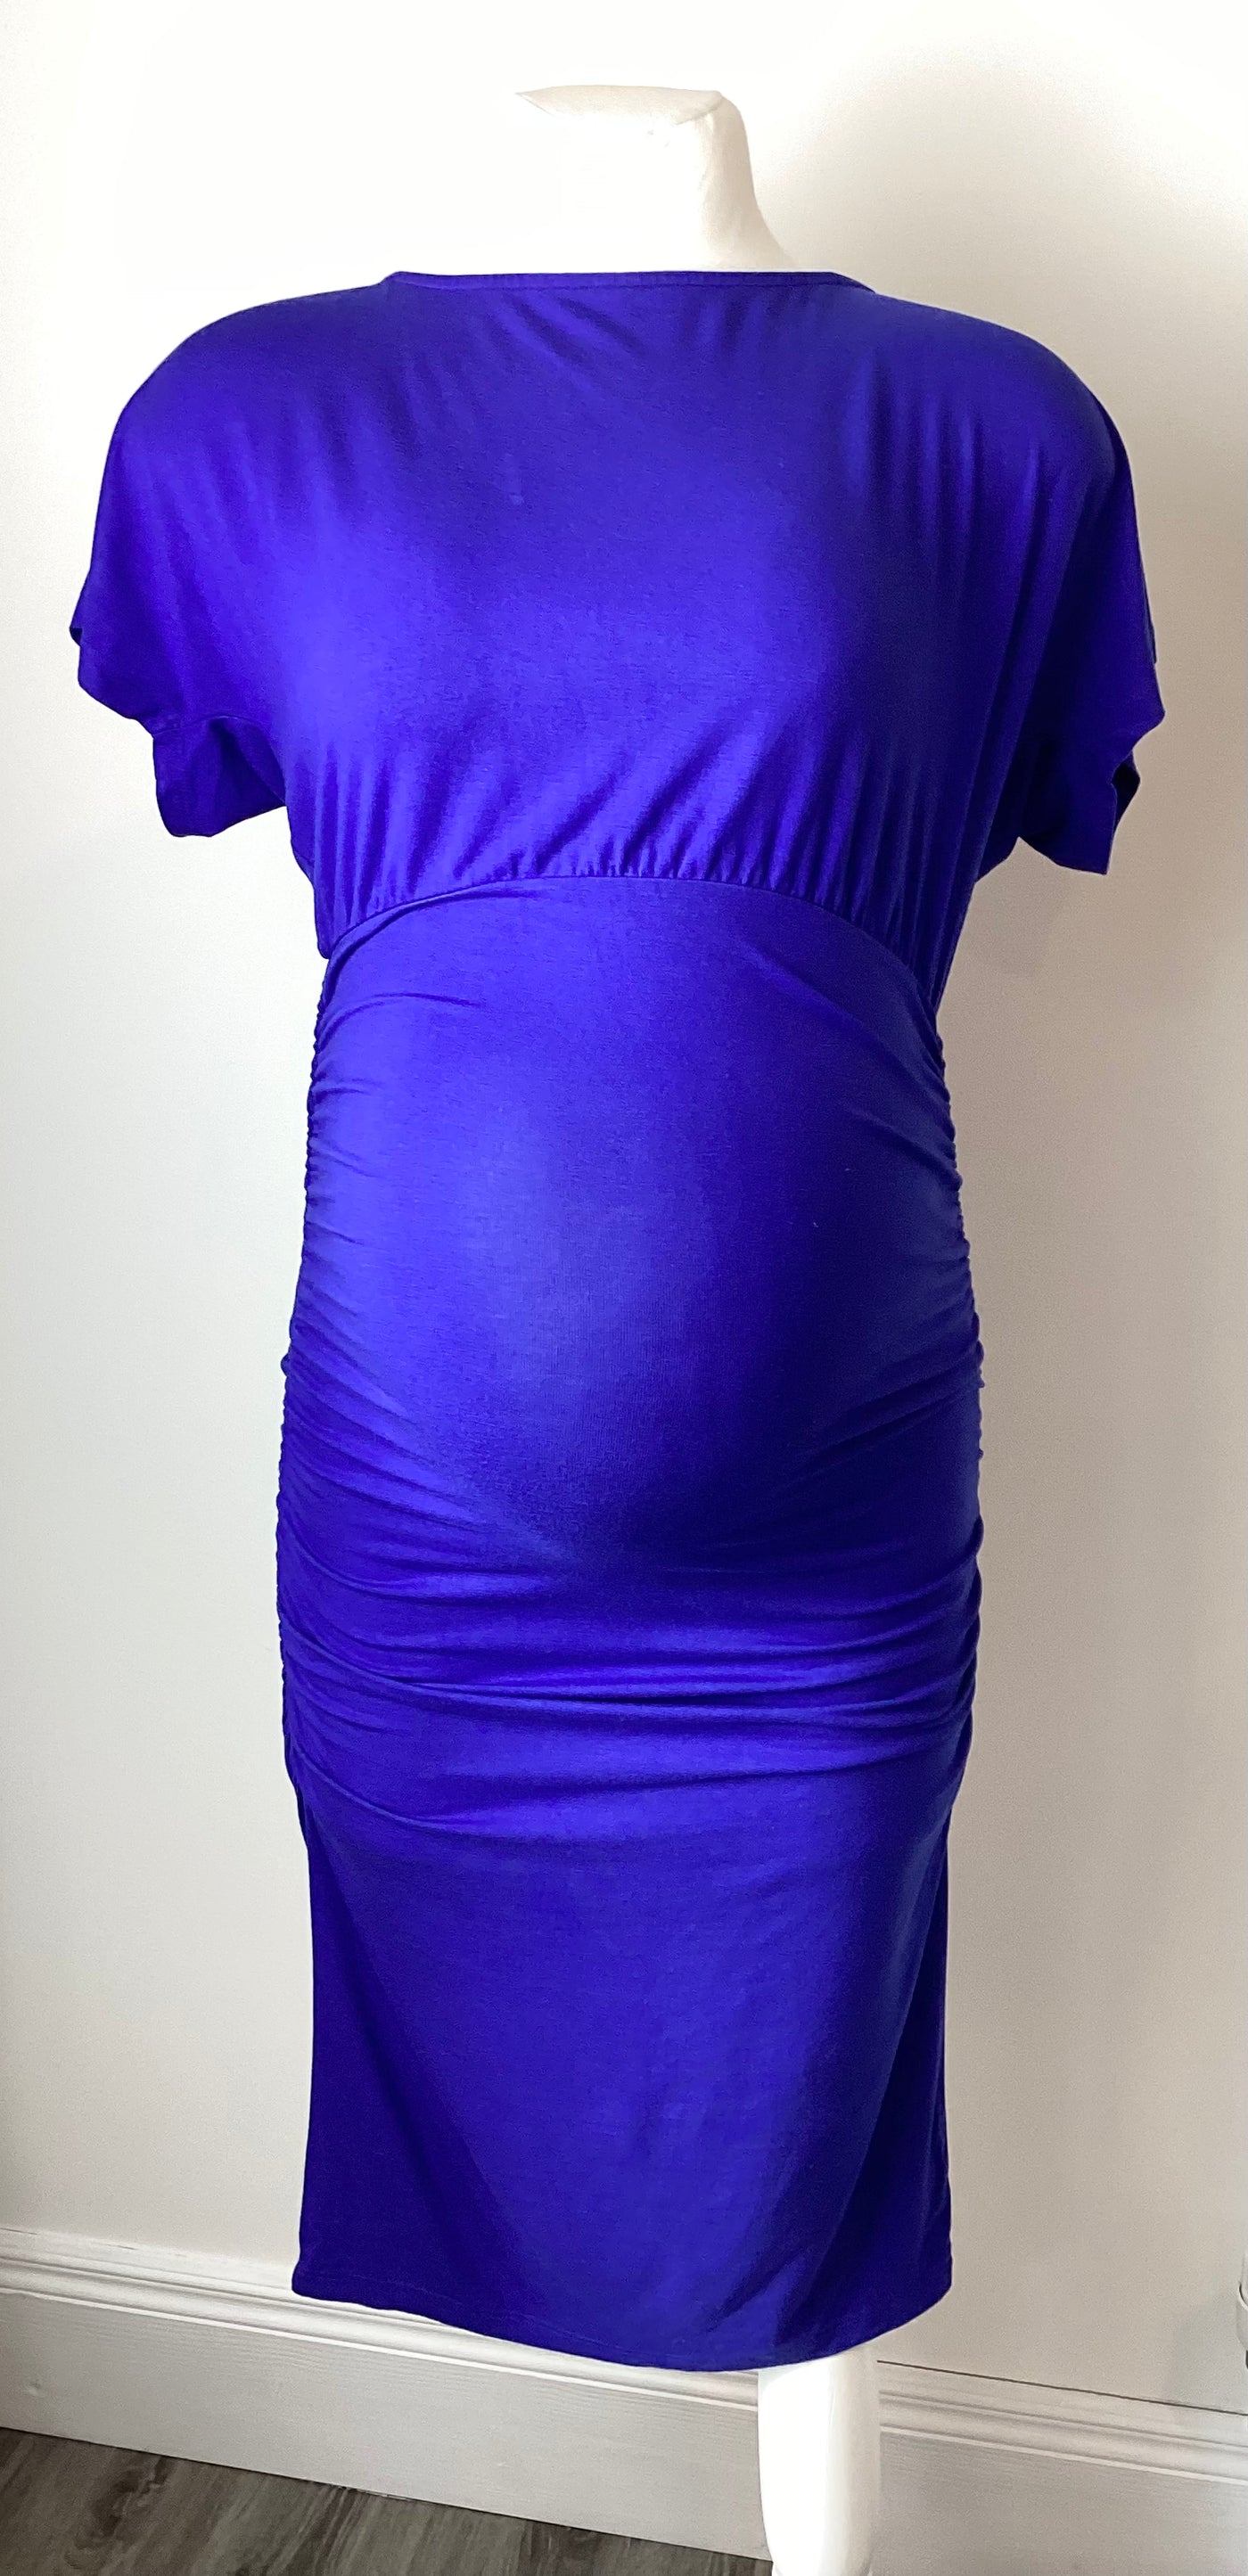 Isabella Oliver Blue Ruched T-Shirt Maternity Dress - Size 0 (Approx UK 6)